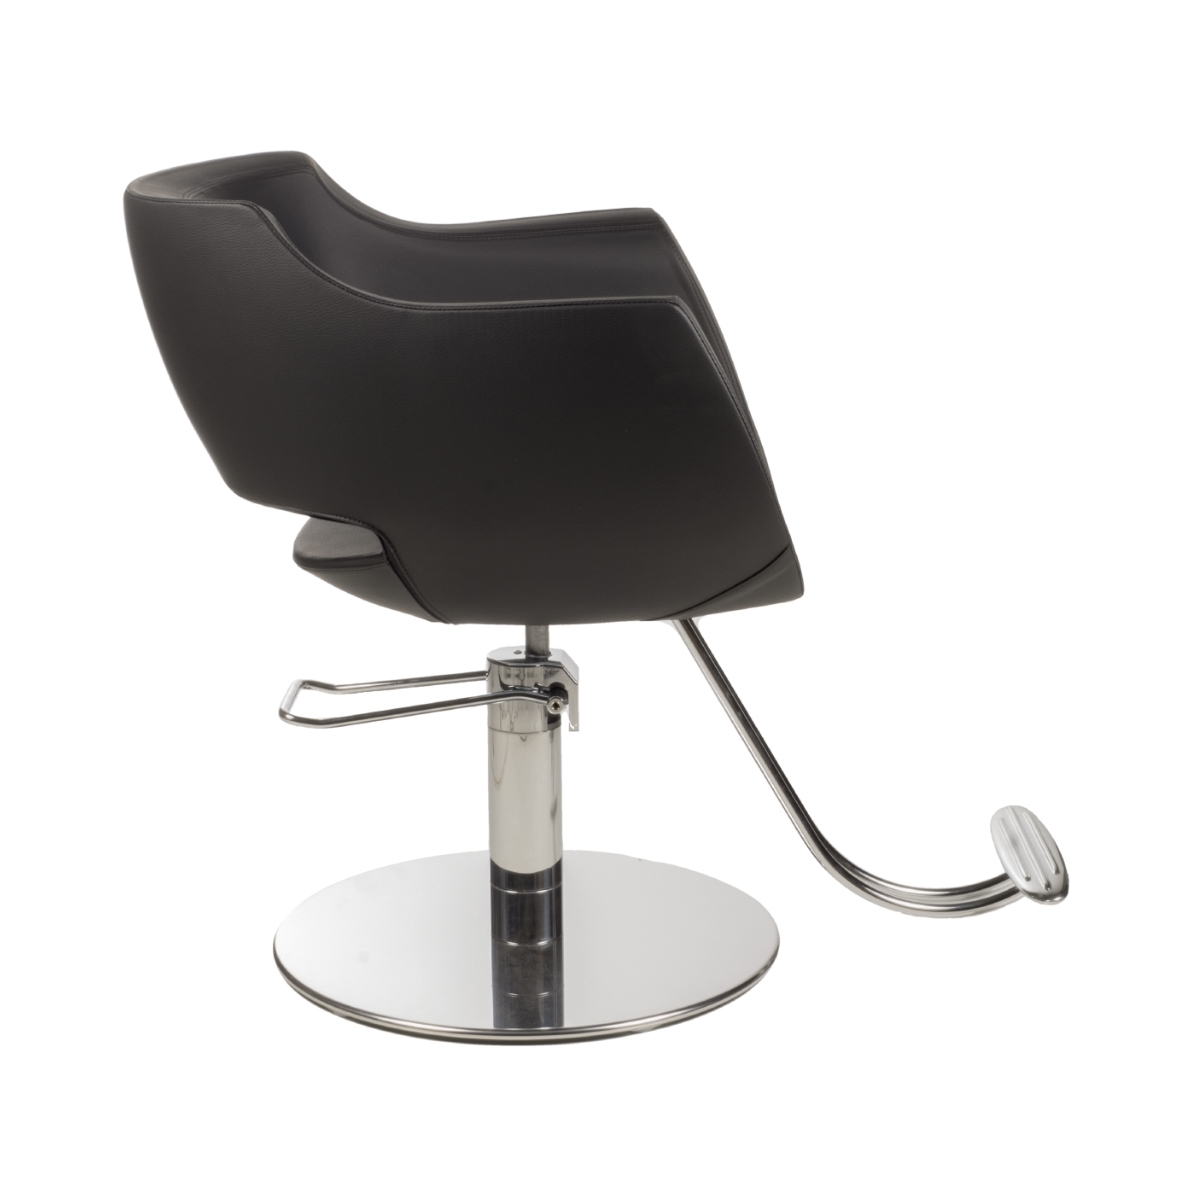 Clust Black Parrot Promo Styling Chair by Gamma & Bross Spa